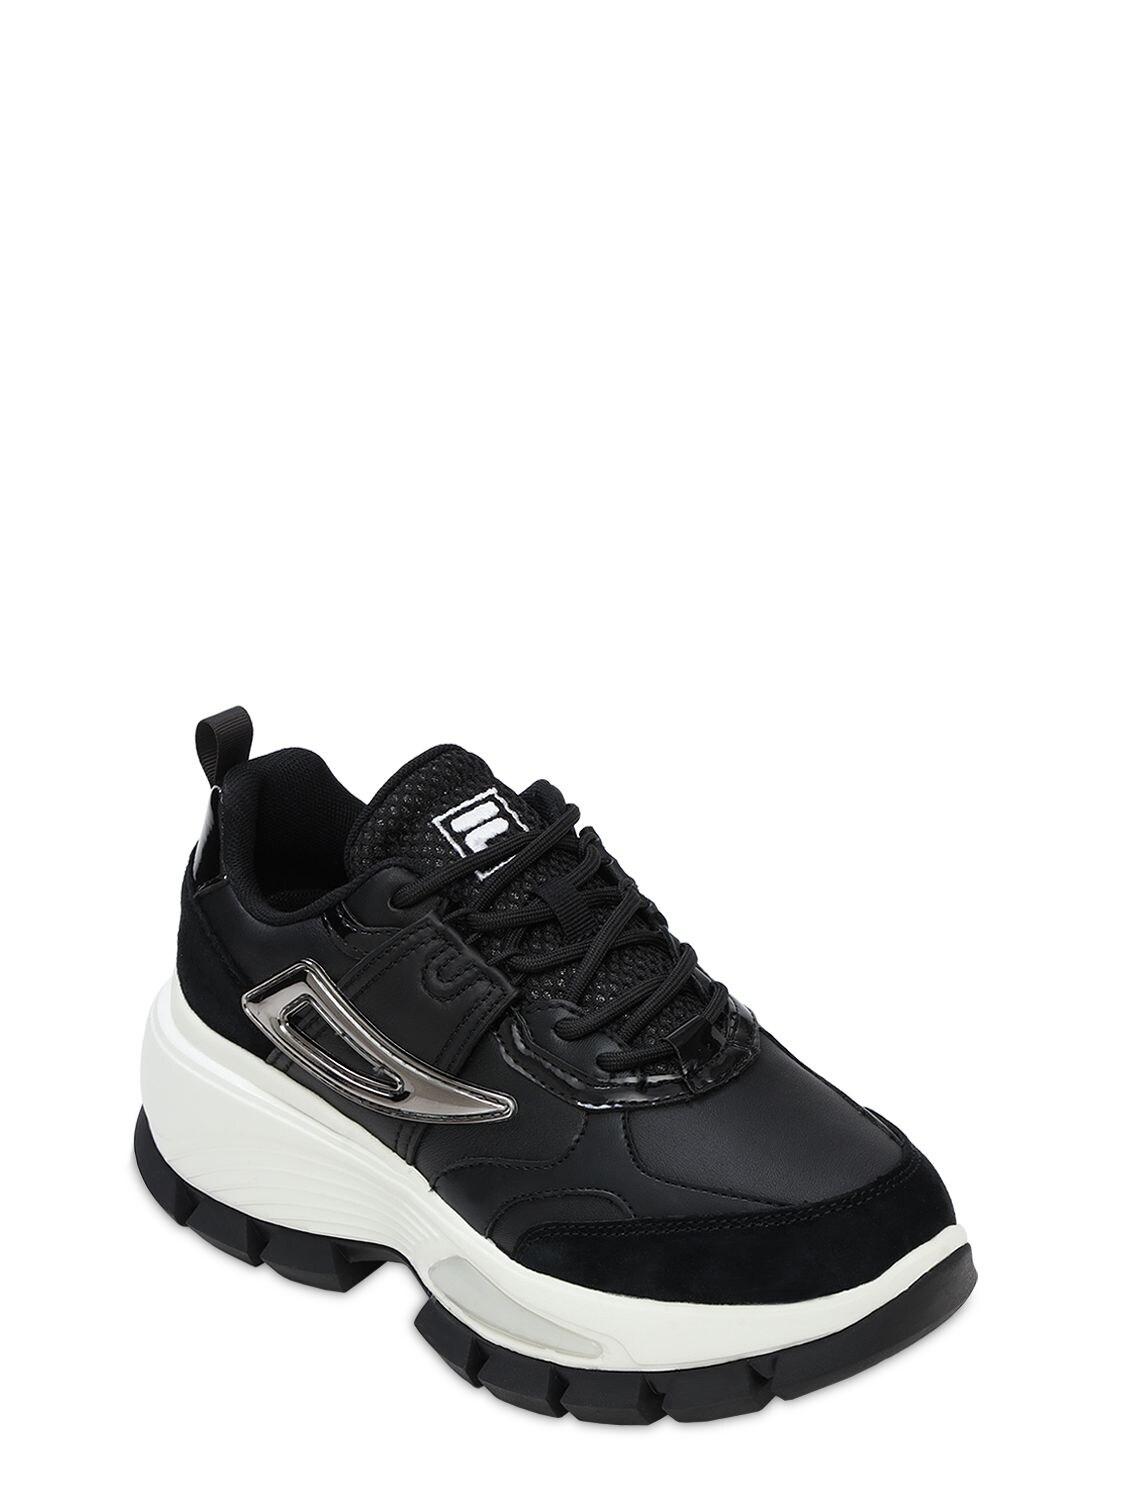 Fila City Hiking Faux Leather Sneakers in Black - Lyst